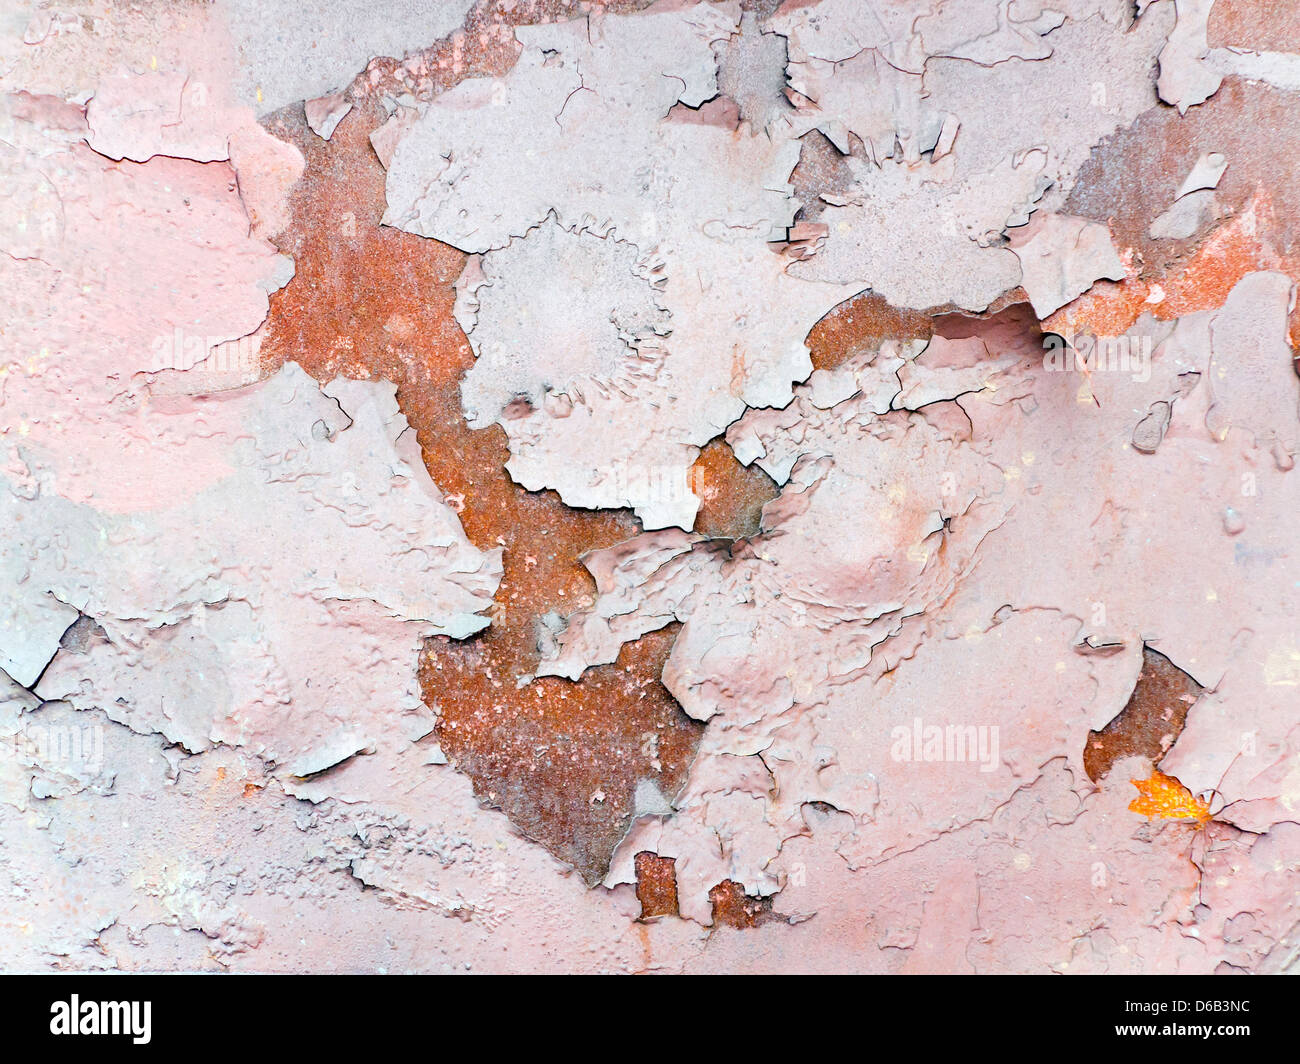 rough and cracked surface - abstract texture Stock Photo